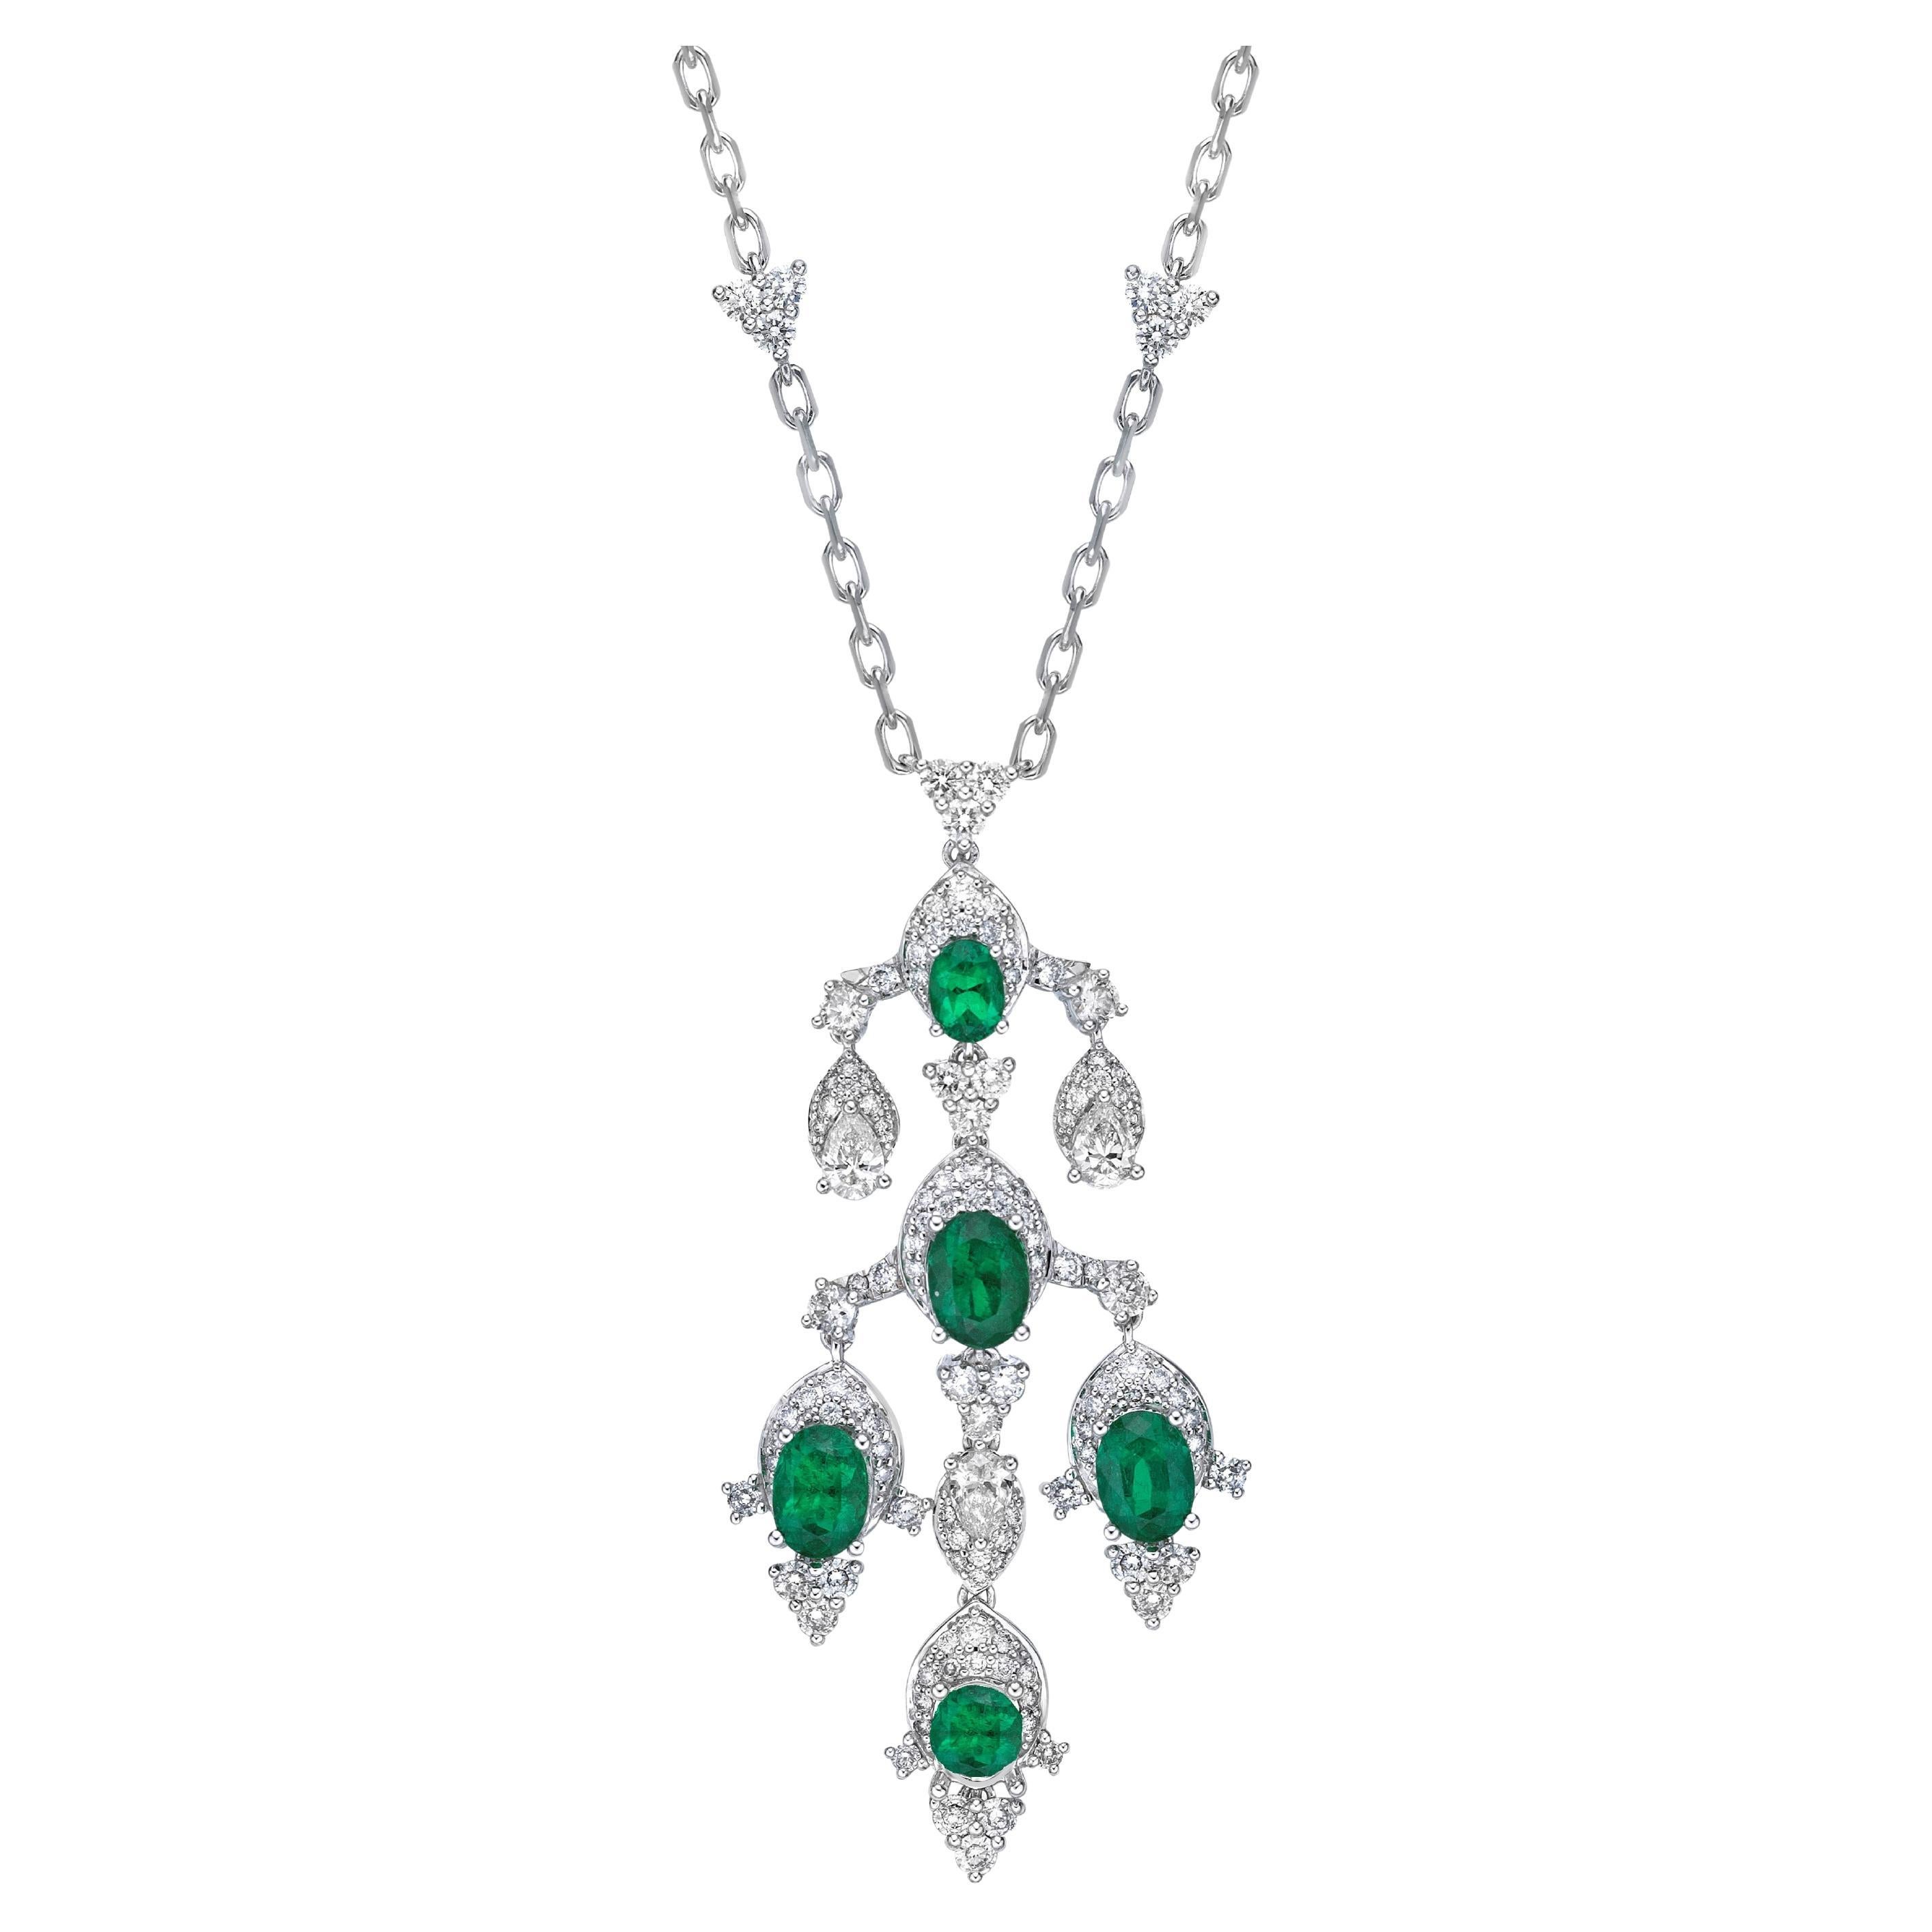 Contemporary Emerald and Diamond Necklace in 18Karat White Gold.